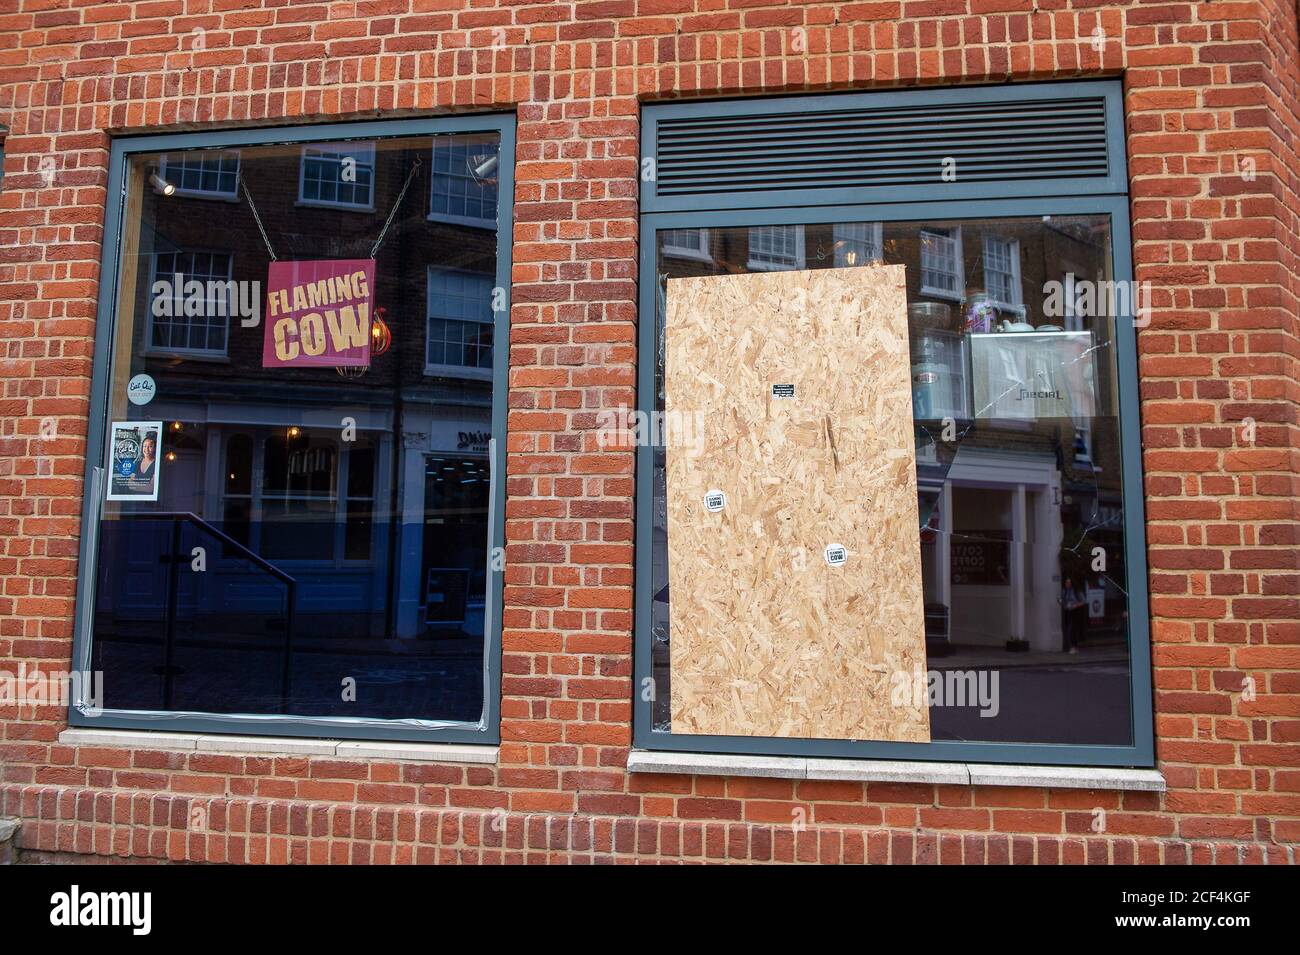 Eton, Windsor, Berkshire, UK. 3rd September, 2020. Criminal damage to a window at the Flaming Cow restaurant in Windsor following a failed attempted break in. Credit: Maureen McLean/Alamy Stock Photo